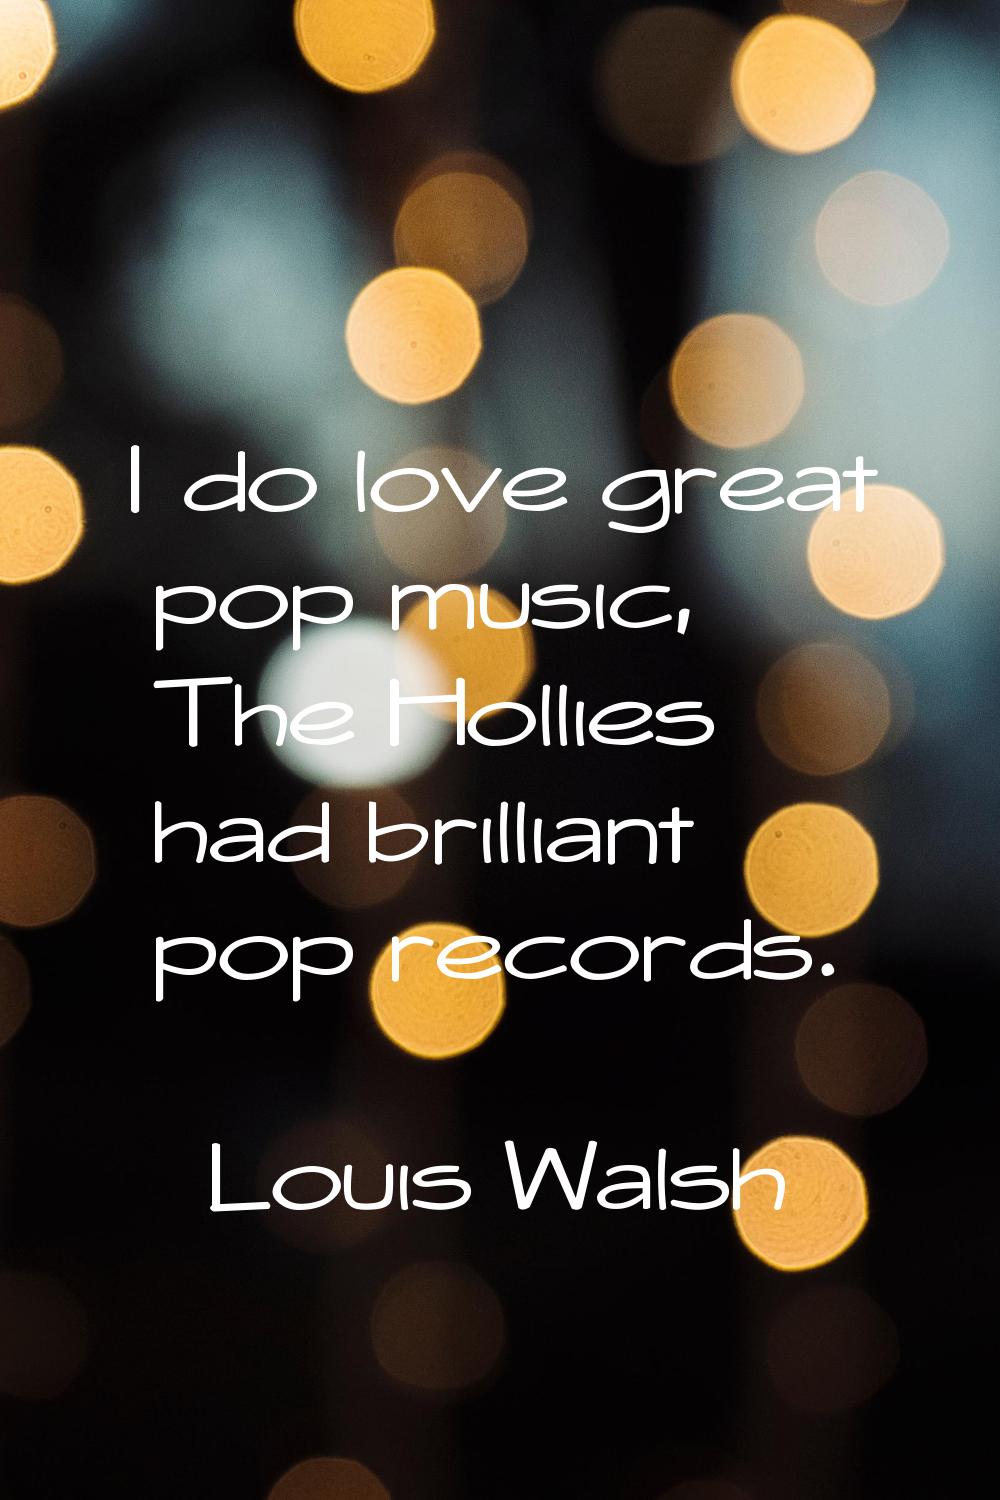 I do love great pop music, The Hollies had brilliant pop records.